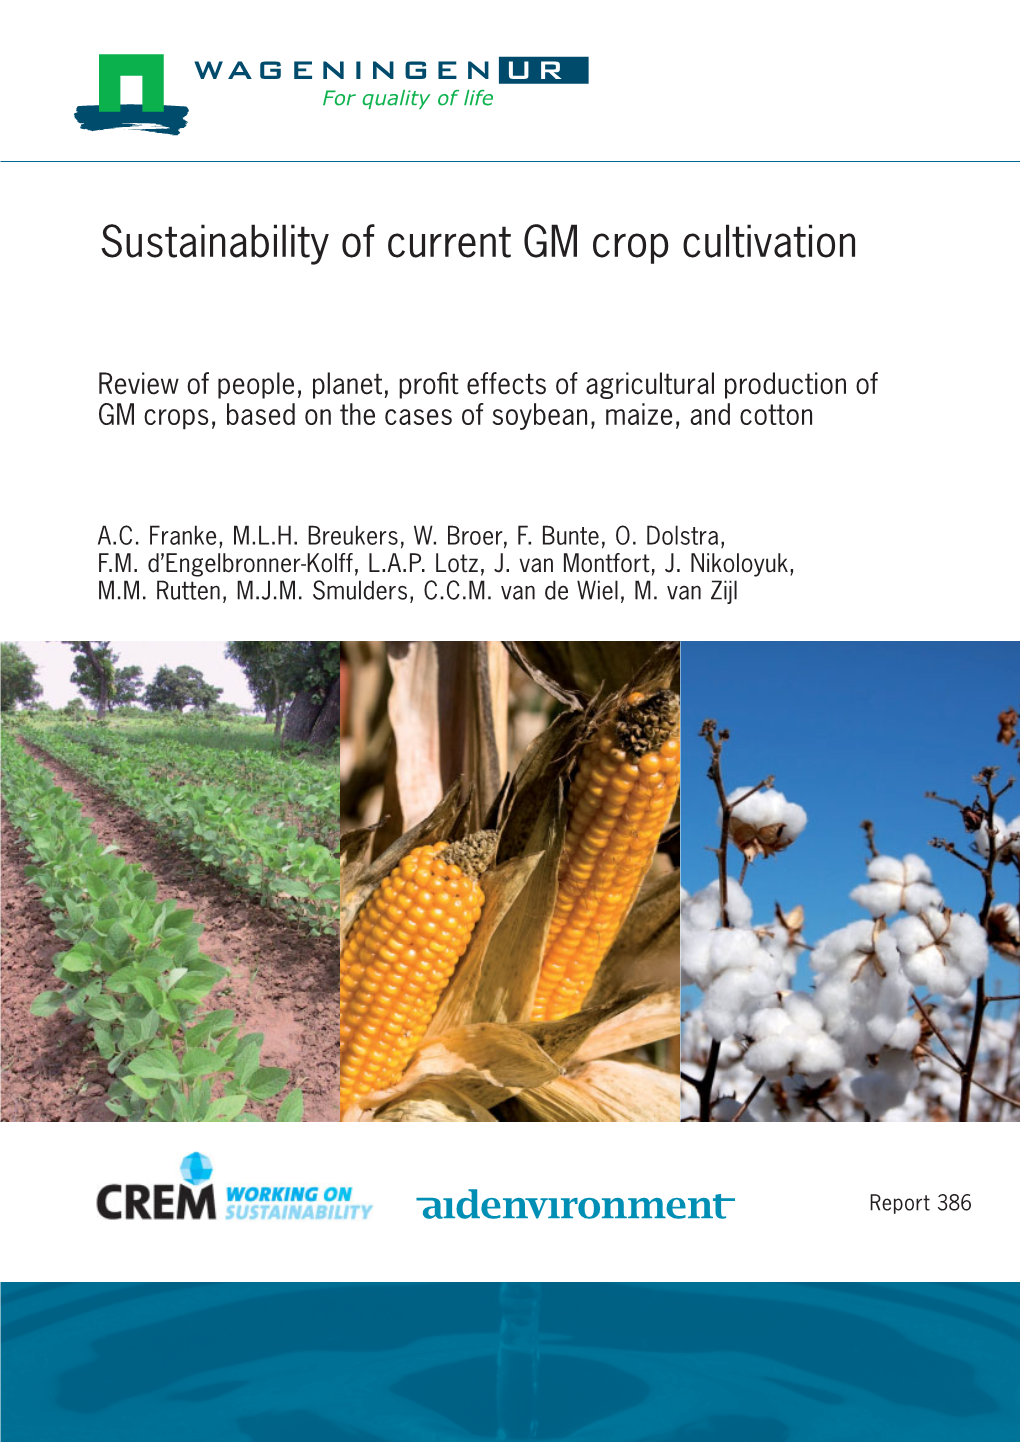 Sustainability of Current GM Crop Cultivation